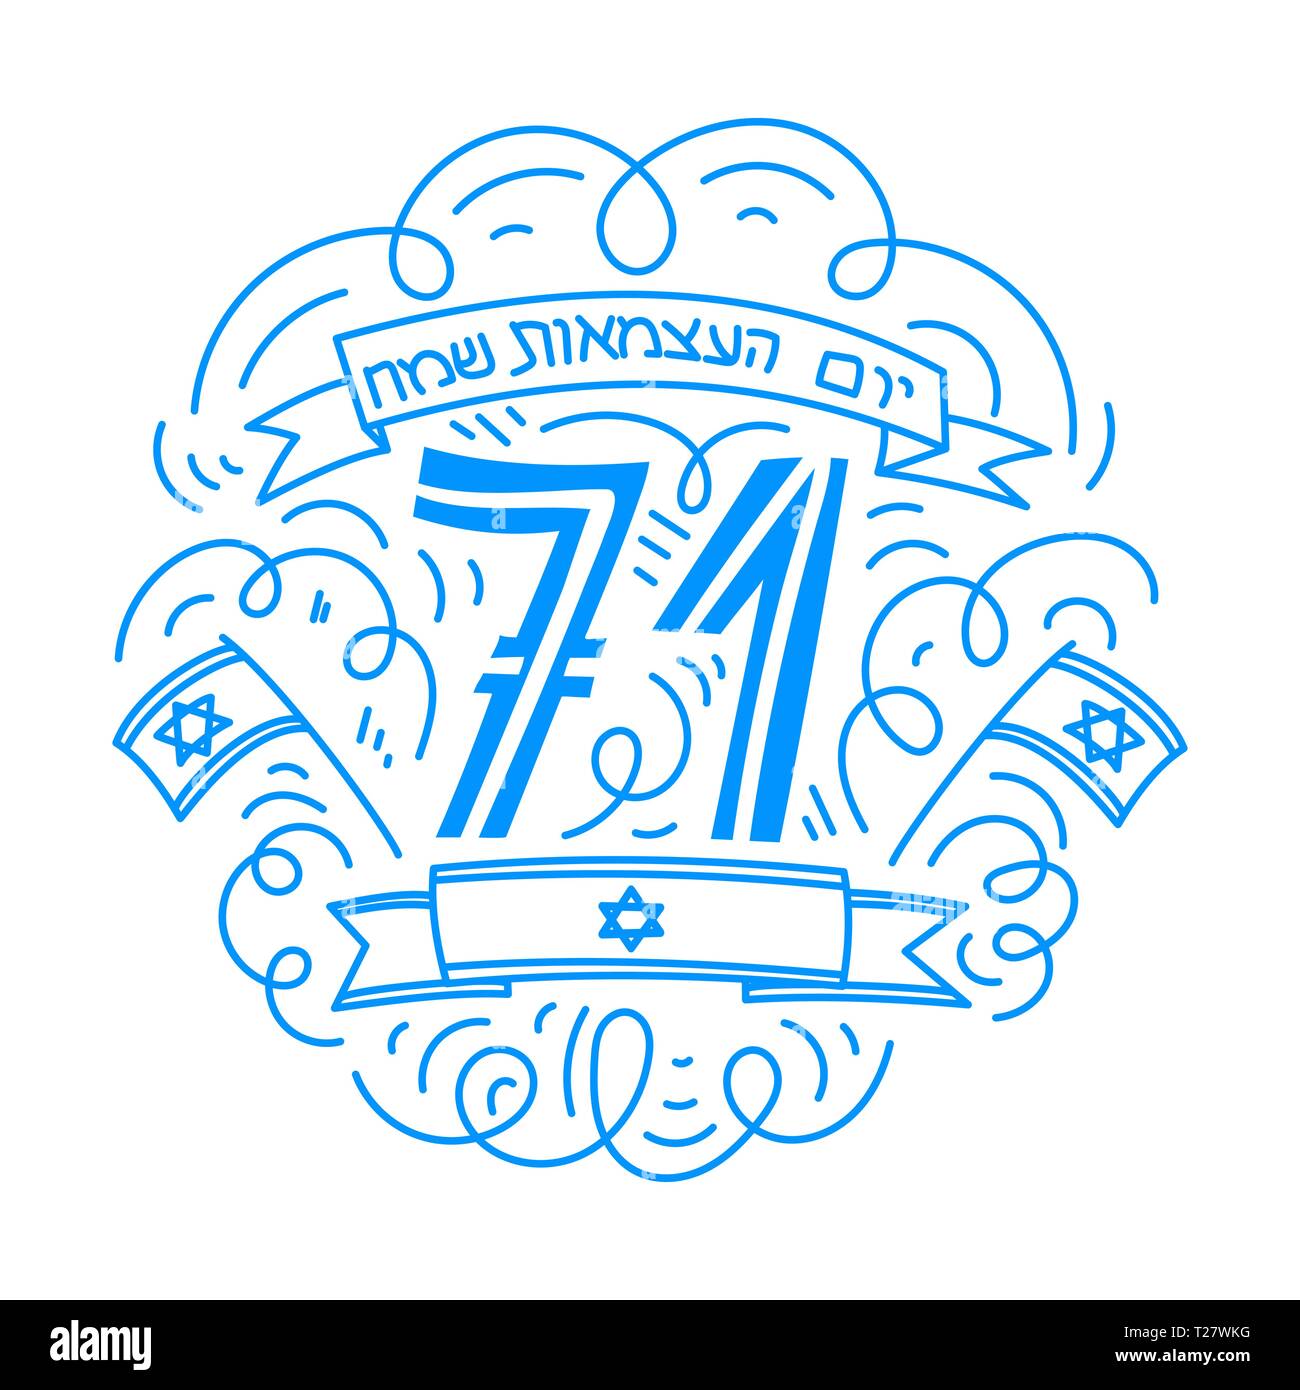 Happy Israel Independence Day (Yom Haatzmaut) in Hebrew. Hand drawn doodle style. Linear vector Illustration. Isolated on white background. Stock Vector